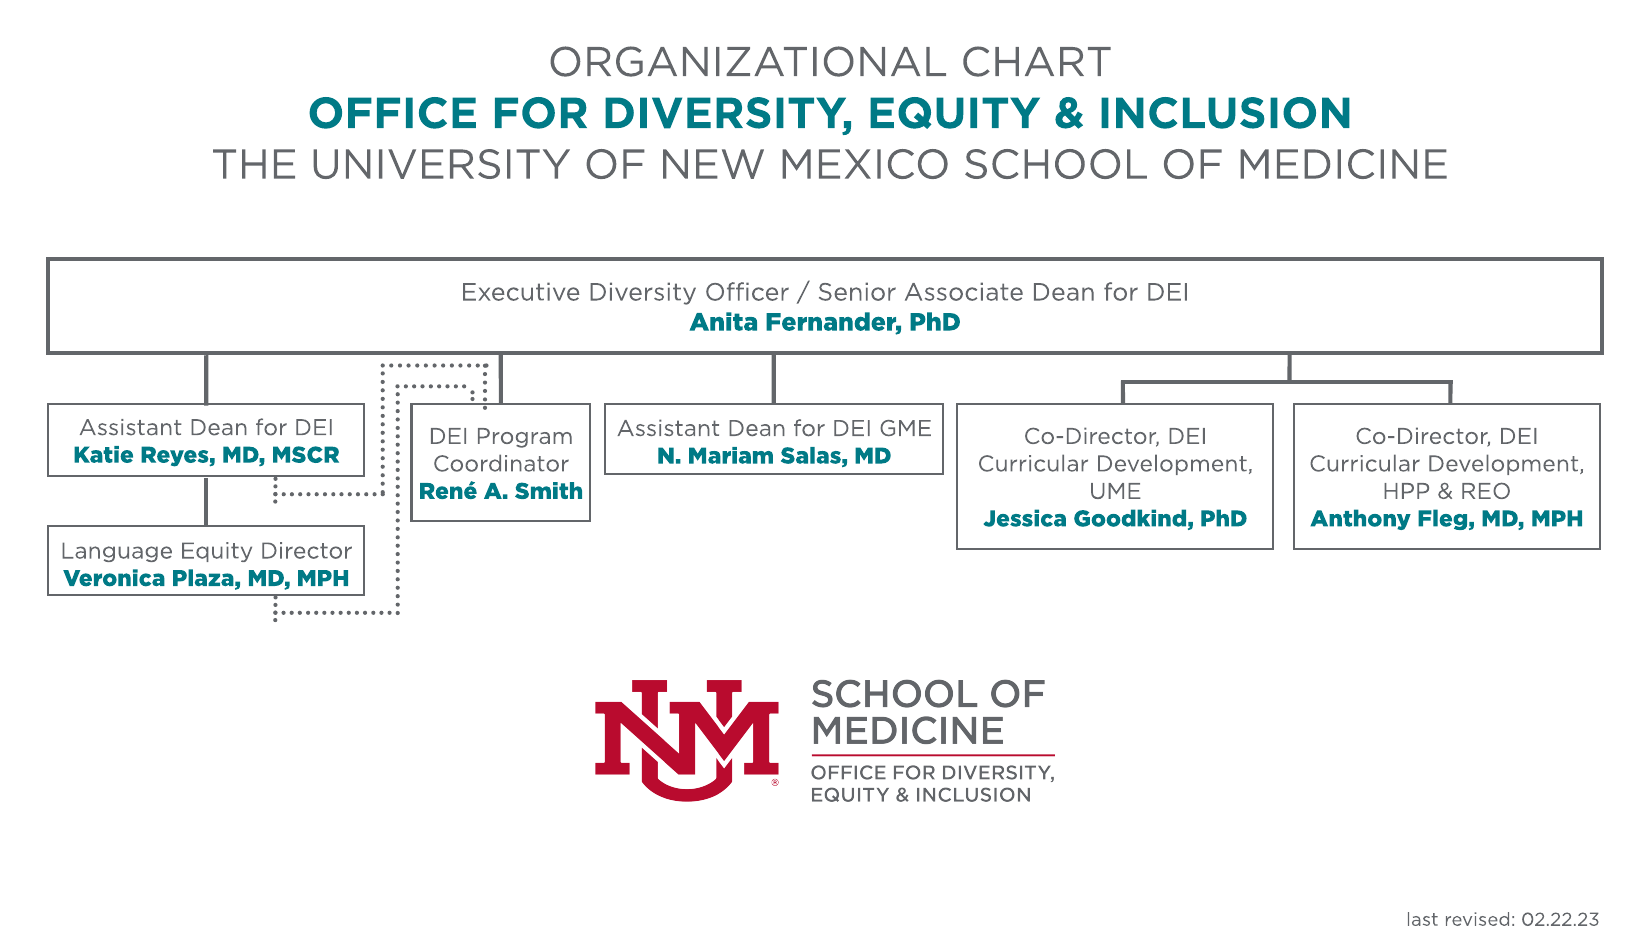 UNM School of Medicine Office for Diversity, Equity & Inclusion の組織図